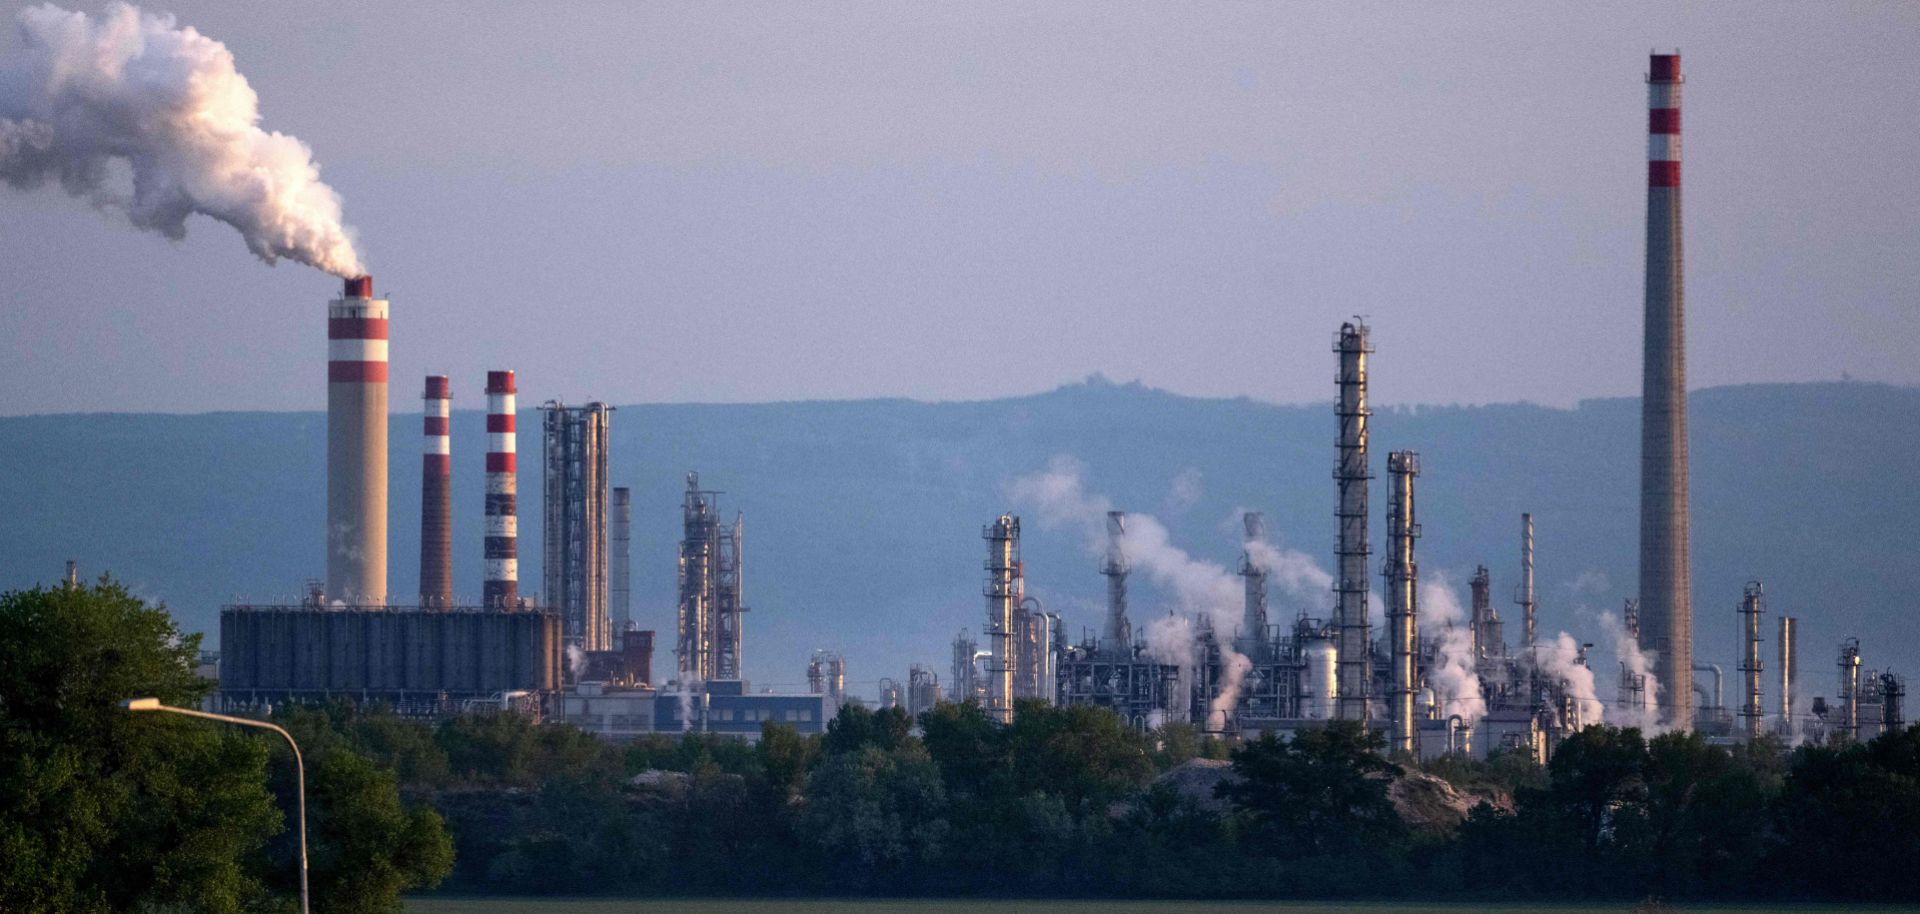 A photo taken on May 3, 2022, shows Slovakia's largest mineral oil refinery Slovnaft, which receives most of its crude supplies from Russia via the Soviet-era Druzhba pipeline.